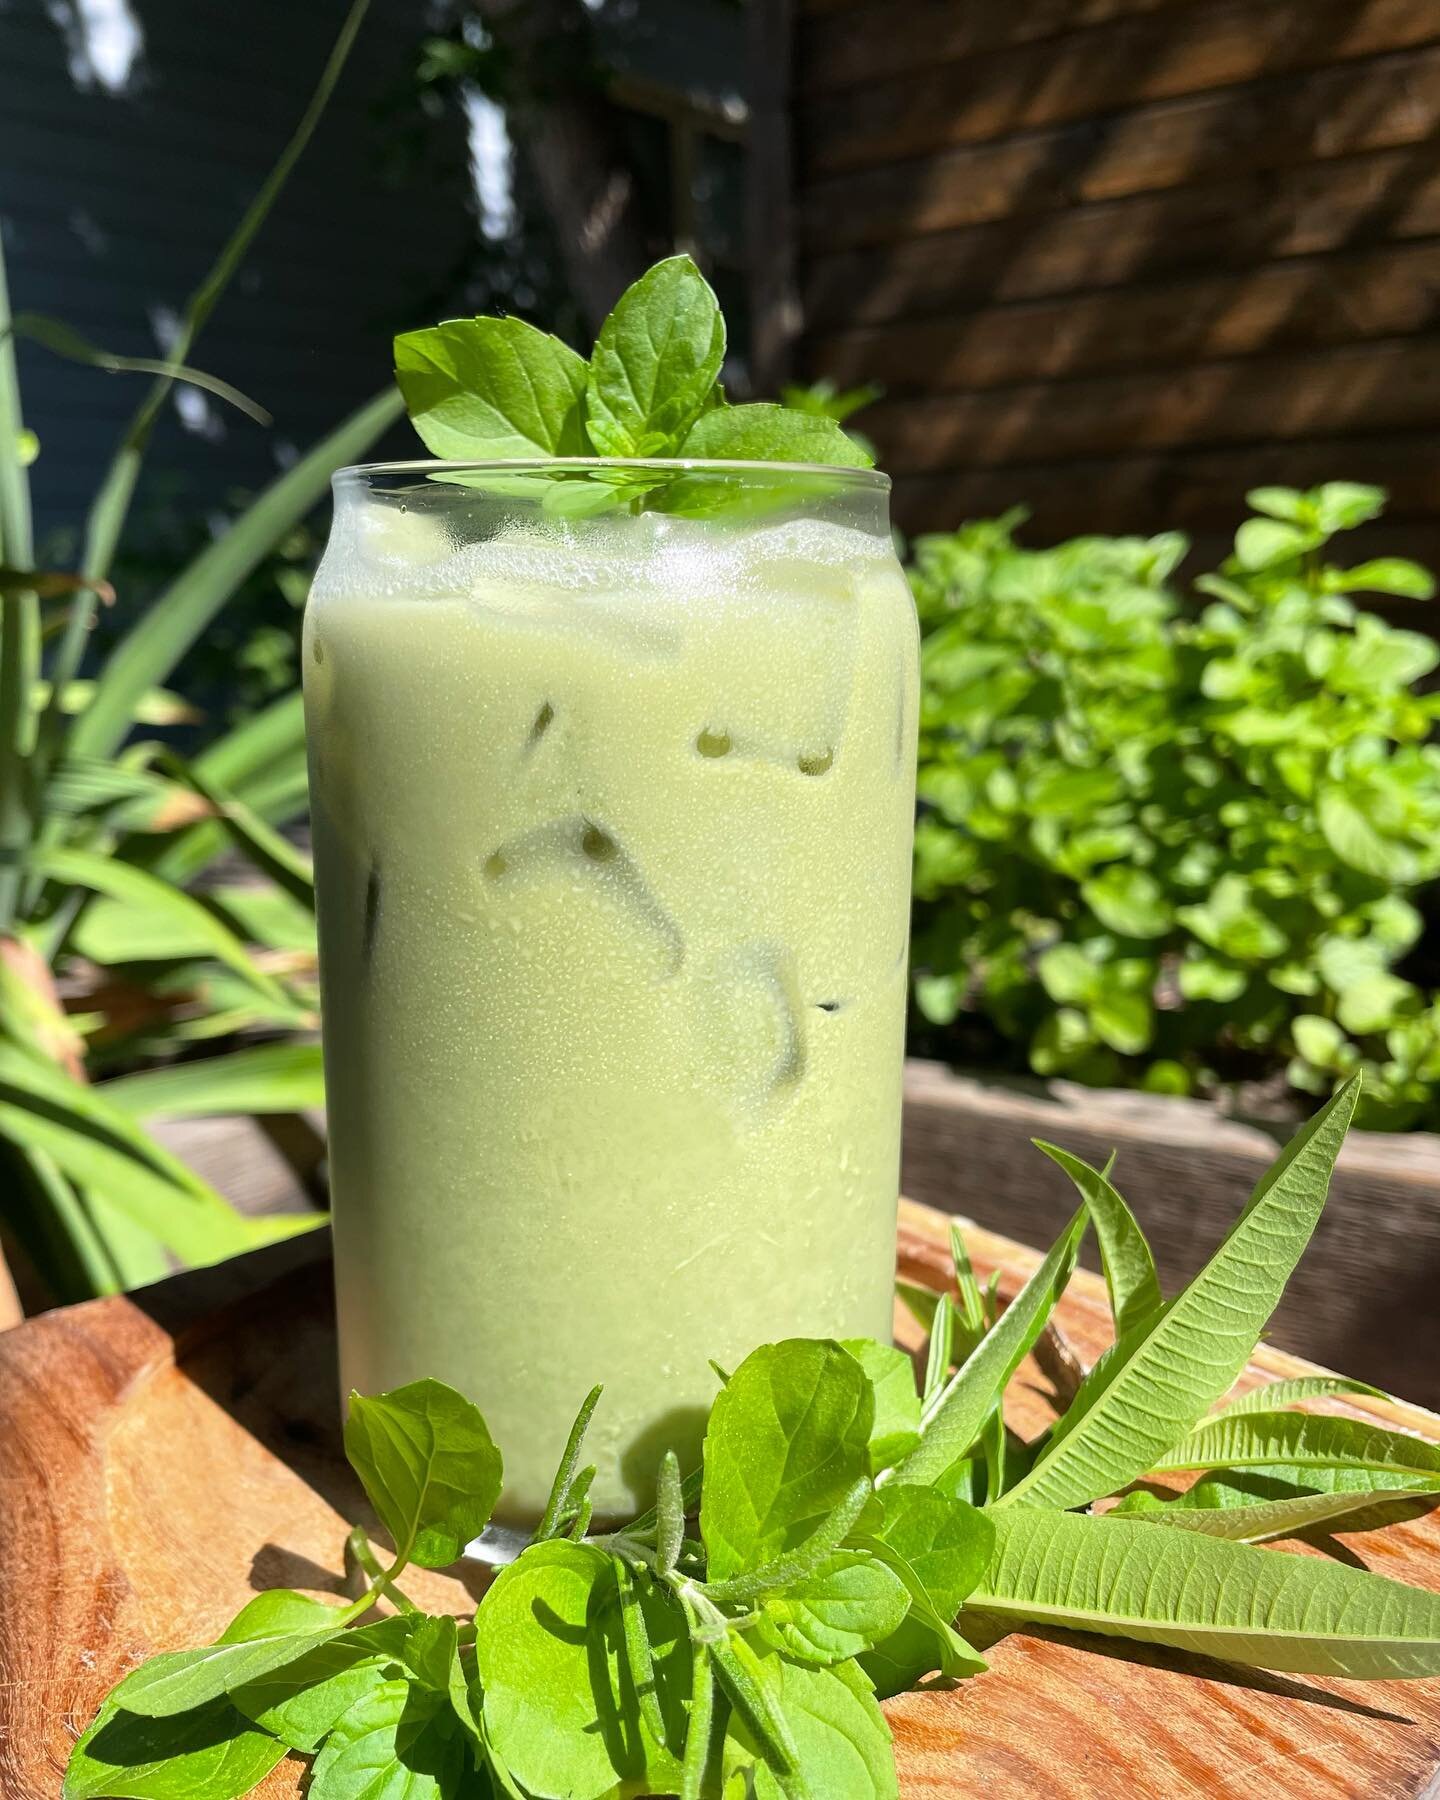 The Moxie Garden Matcha 🌿
Iced matcha with lemon verbena, orange mint, and rosemary infused simple syrup. All herbs fresh from our garden.

Available at Louisville for a limited time only!